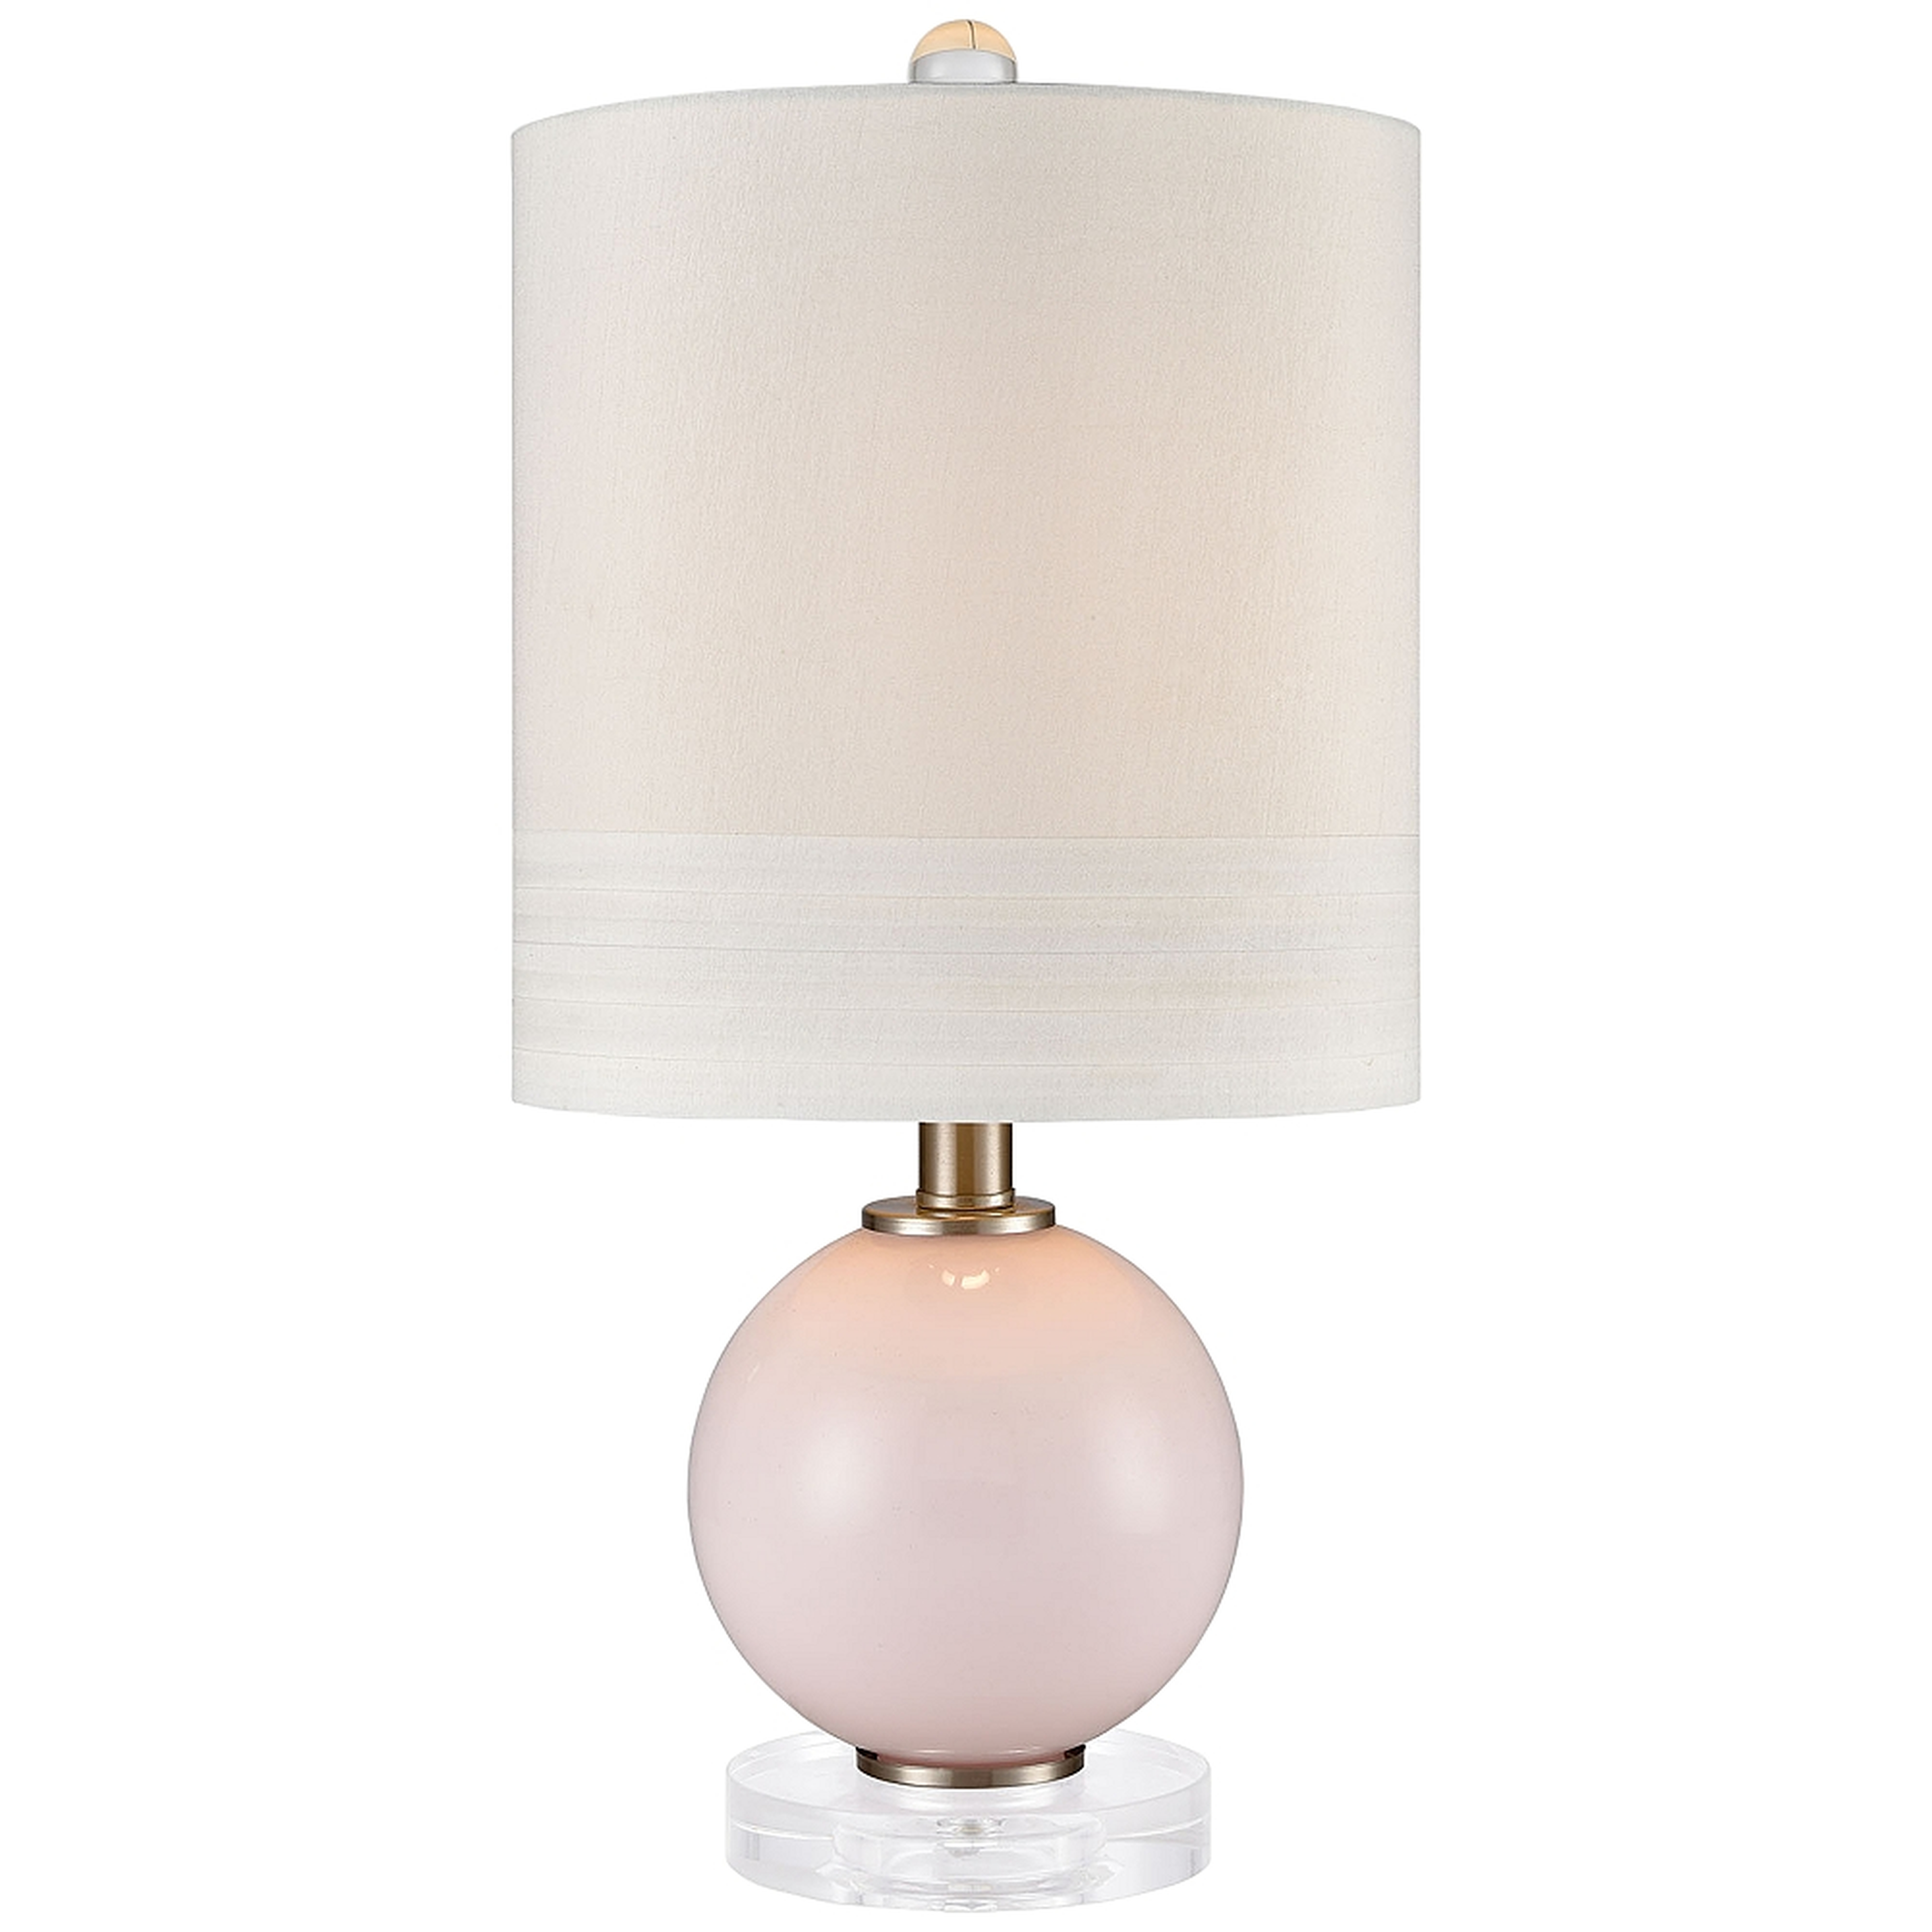 Dimond Fay Pale Pink Crystal Glass Accent Table Lamp - Style # 916R0 - Lamps Plus